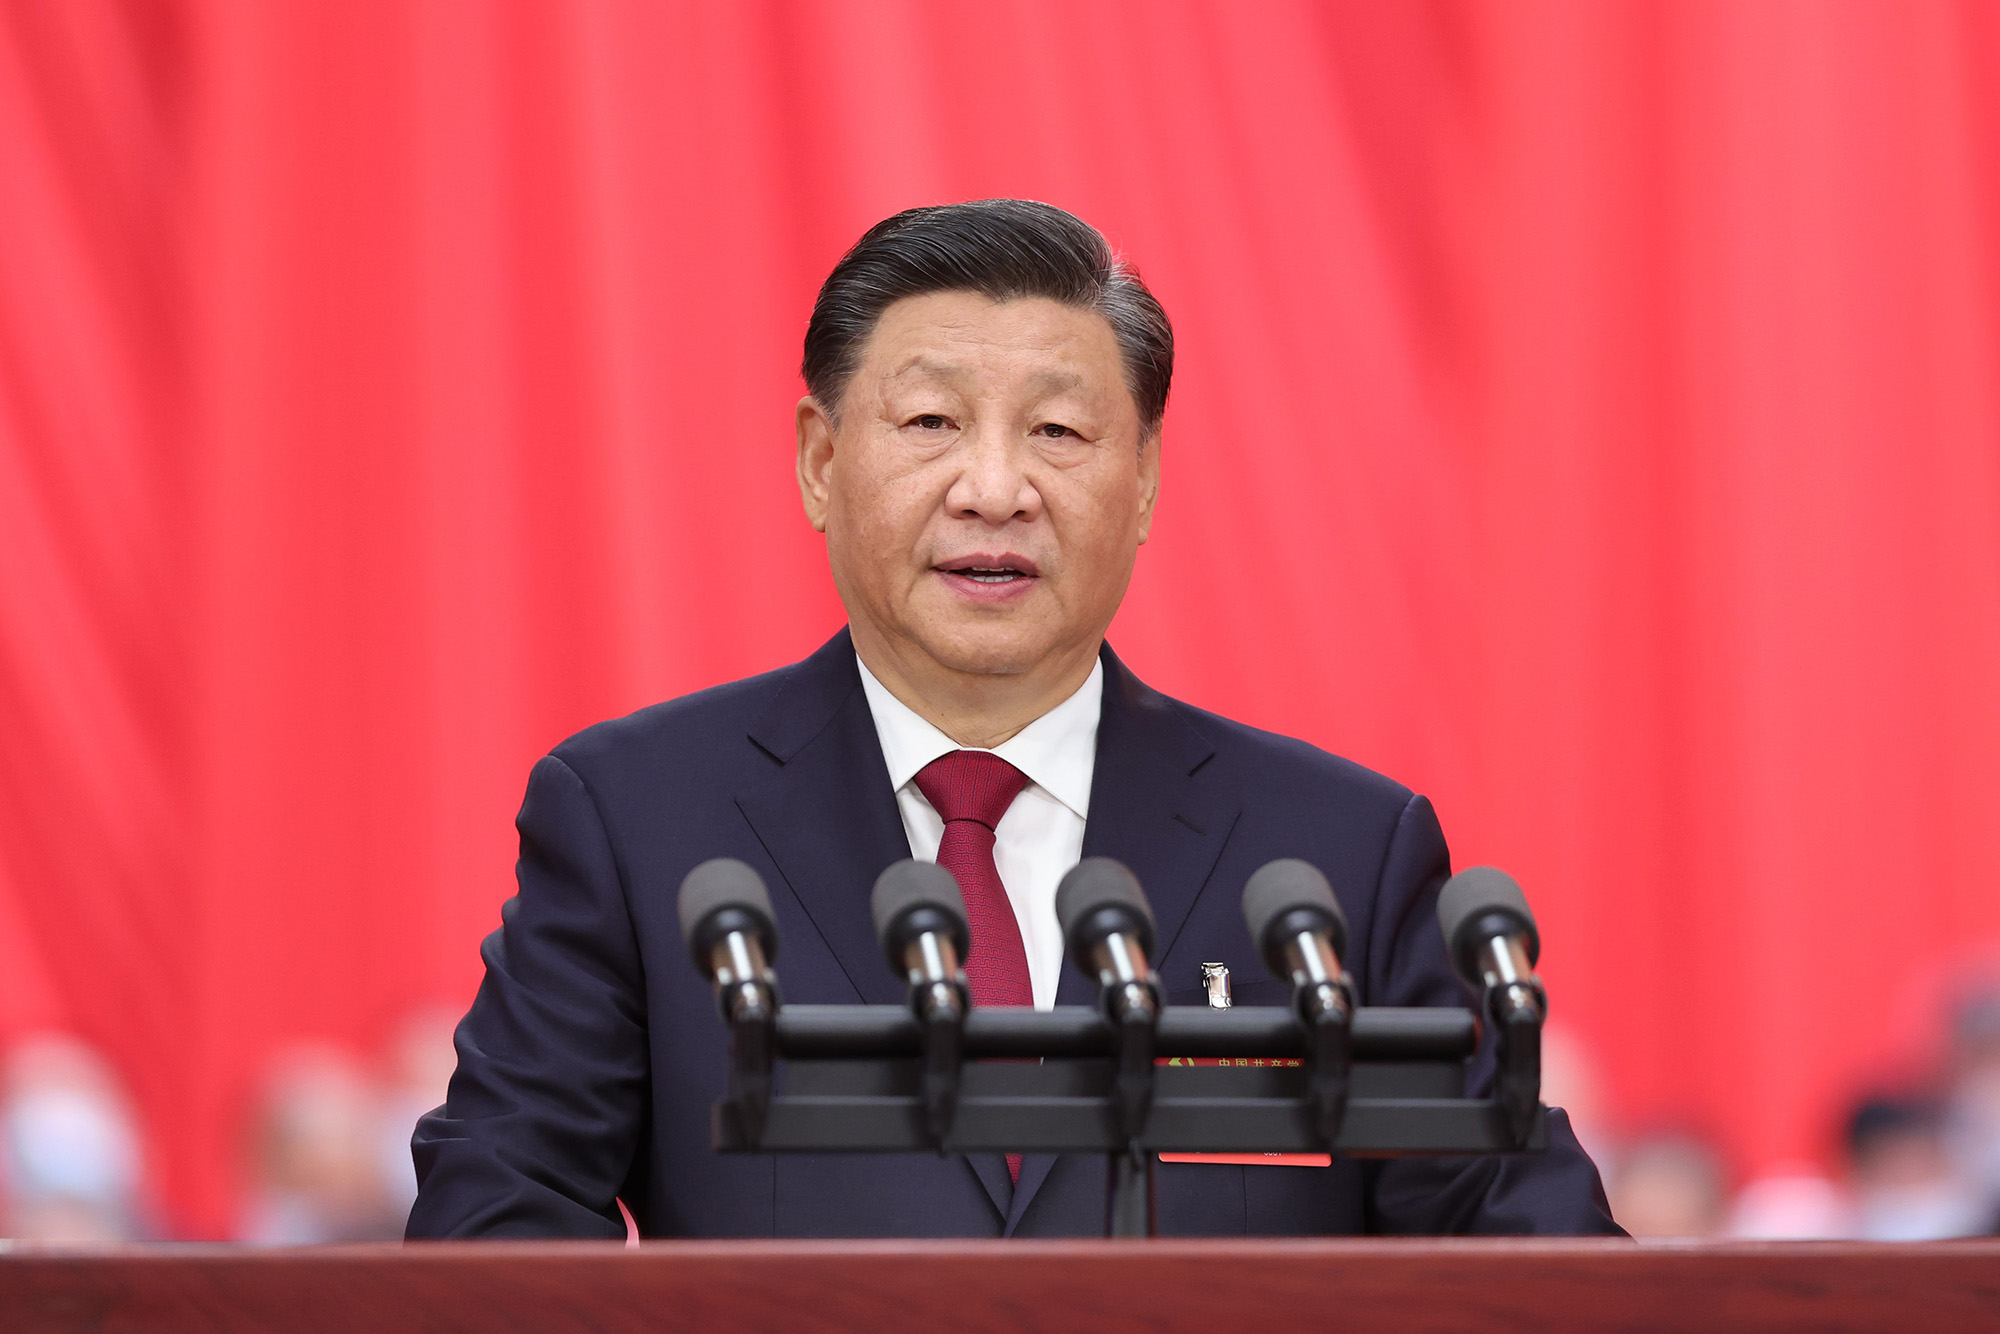 Xi Jinping delivers a report at the Great Hall of the People in Beijing, China, on October 16.